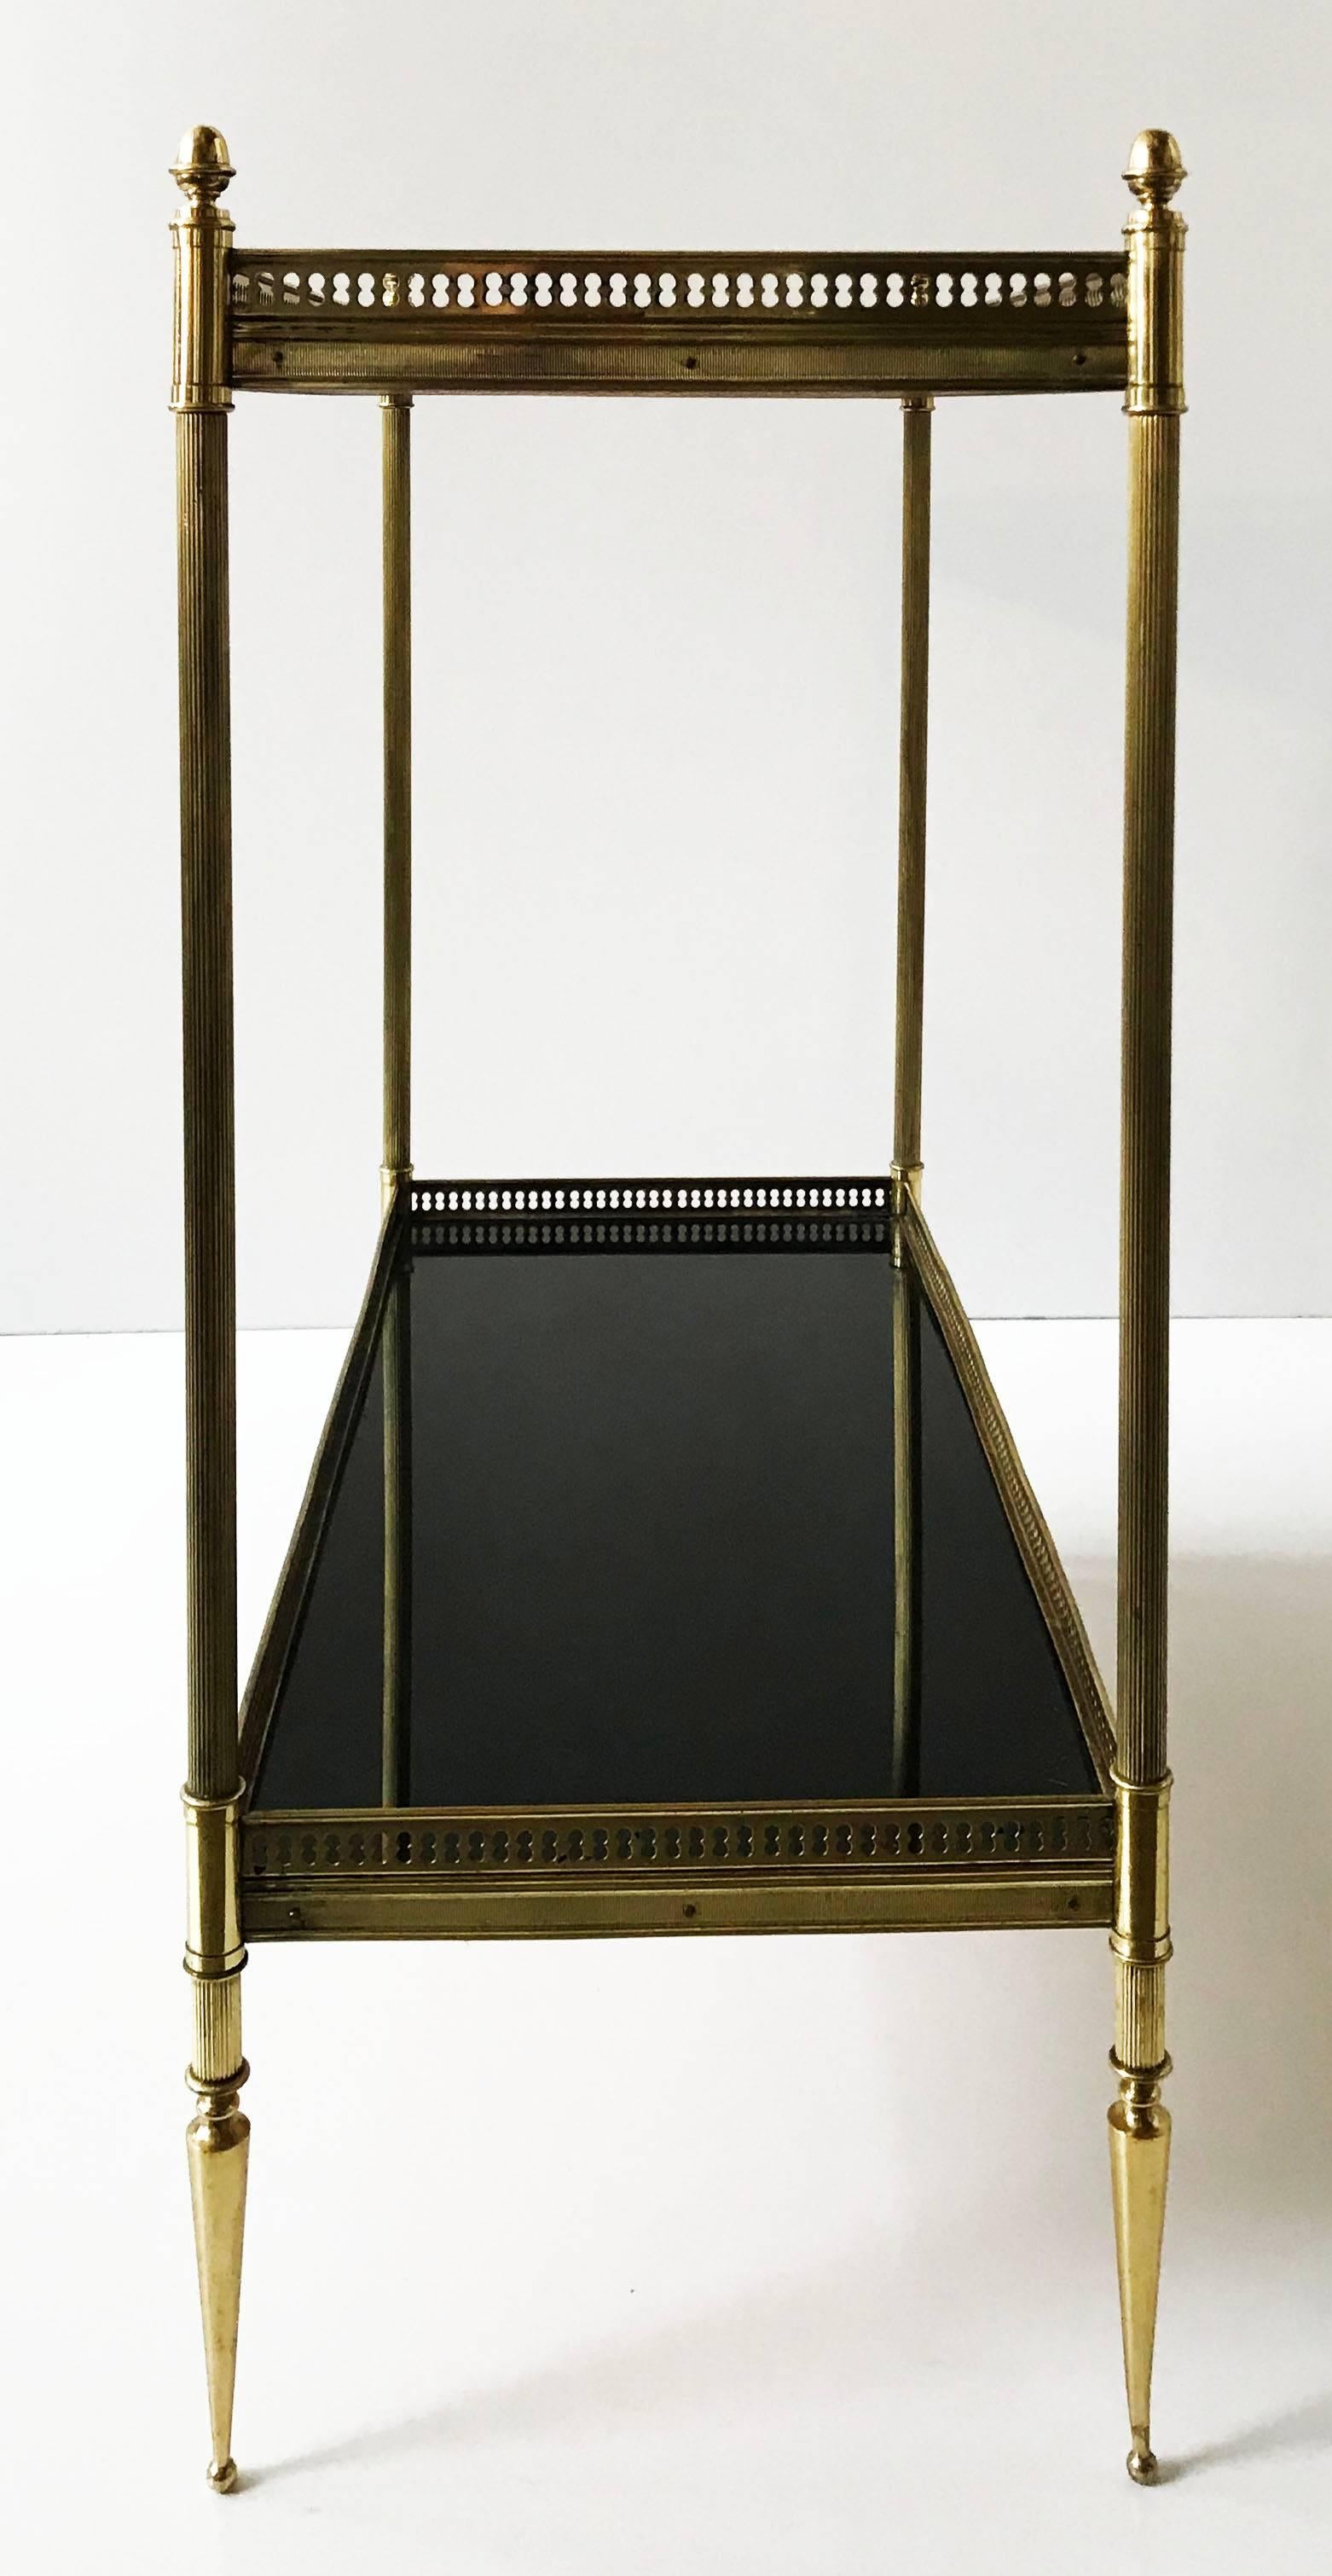 Superb pair of Maison Jansen side table, brass frame and black glass top
two tiers. 

from the floor to the first tier: 8 inches H.